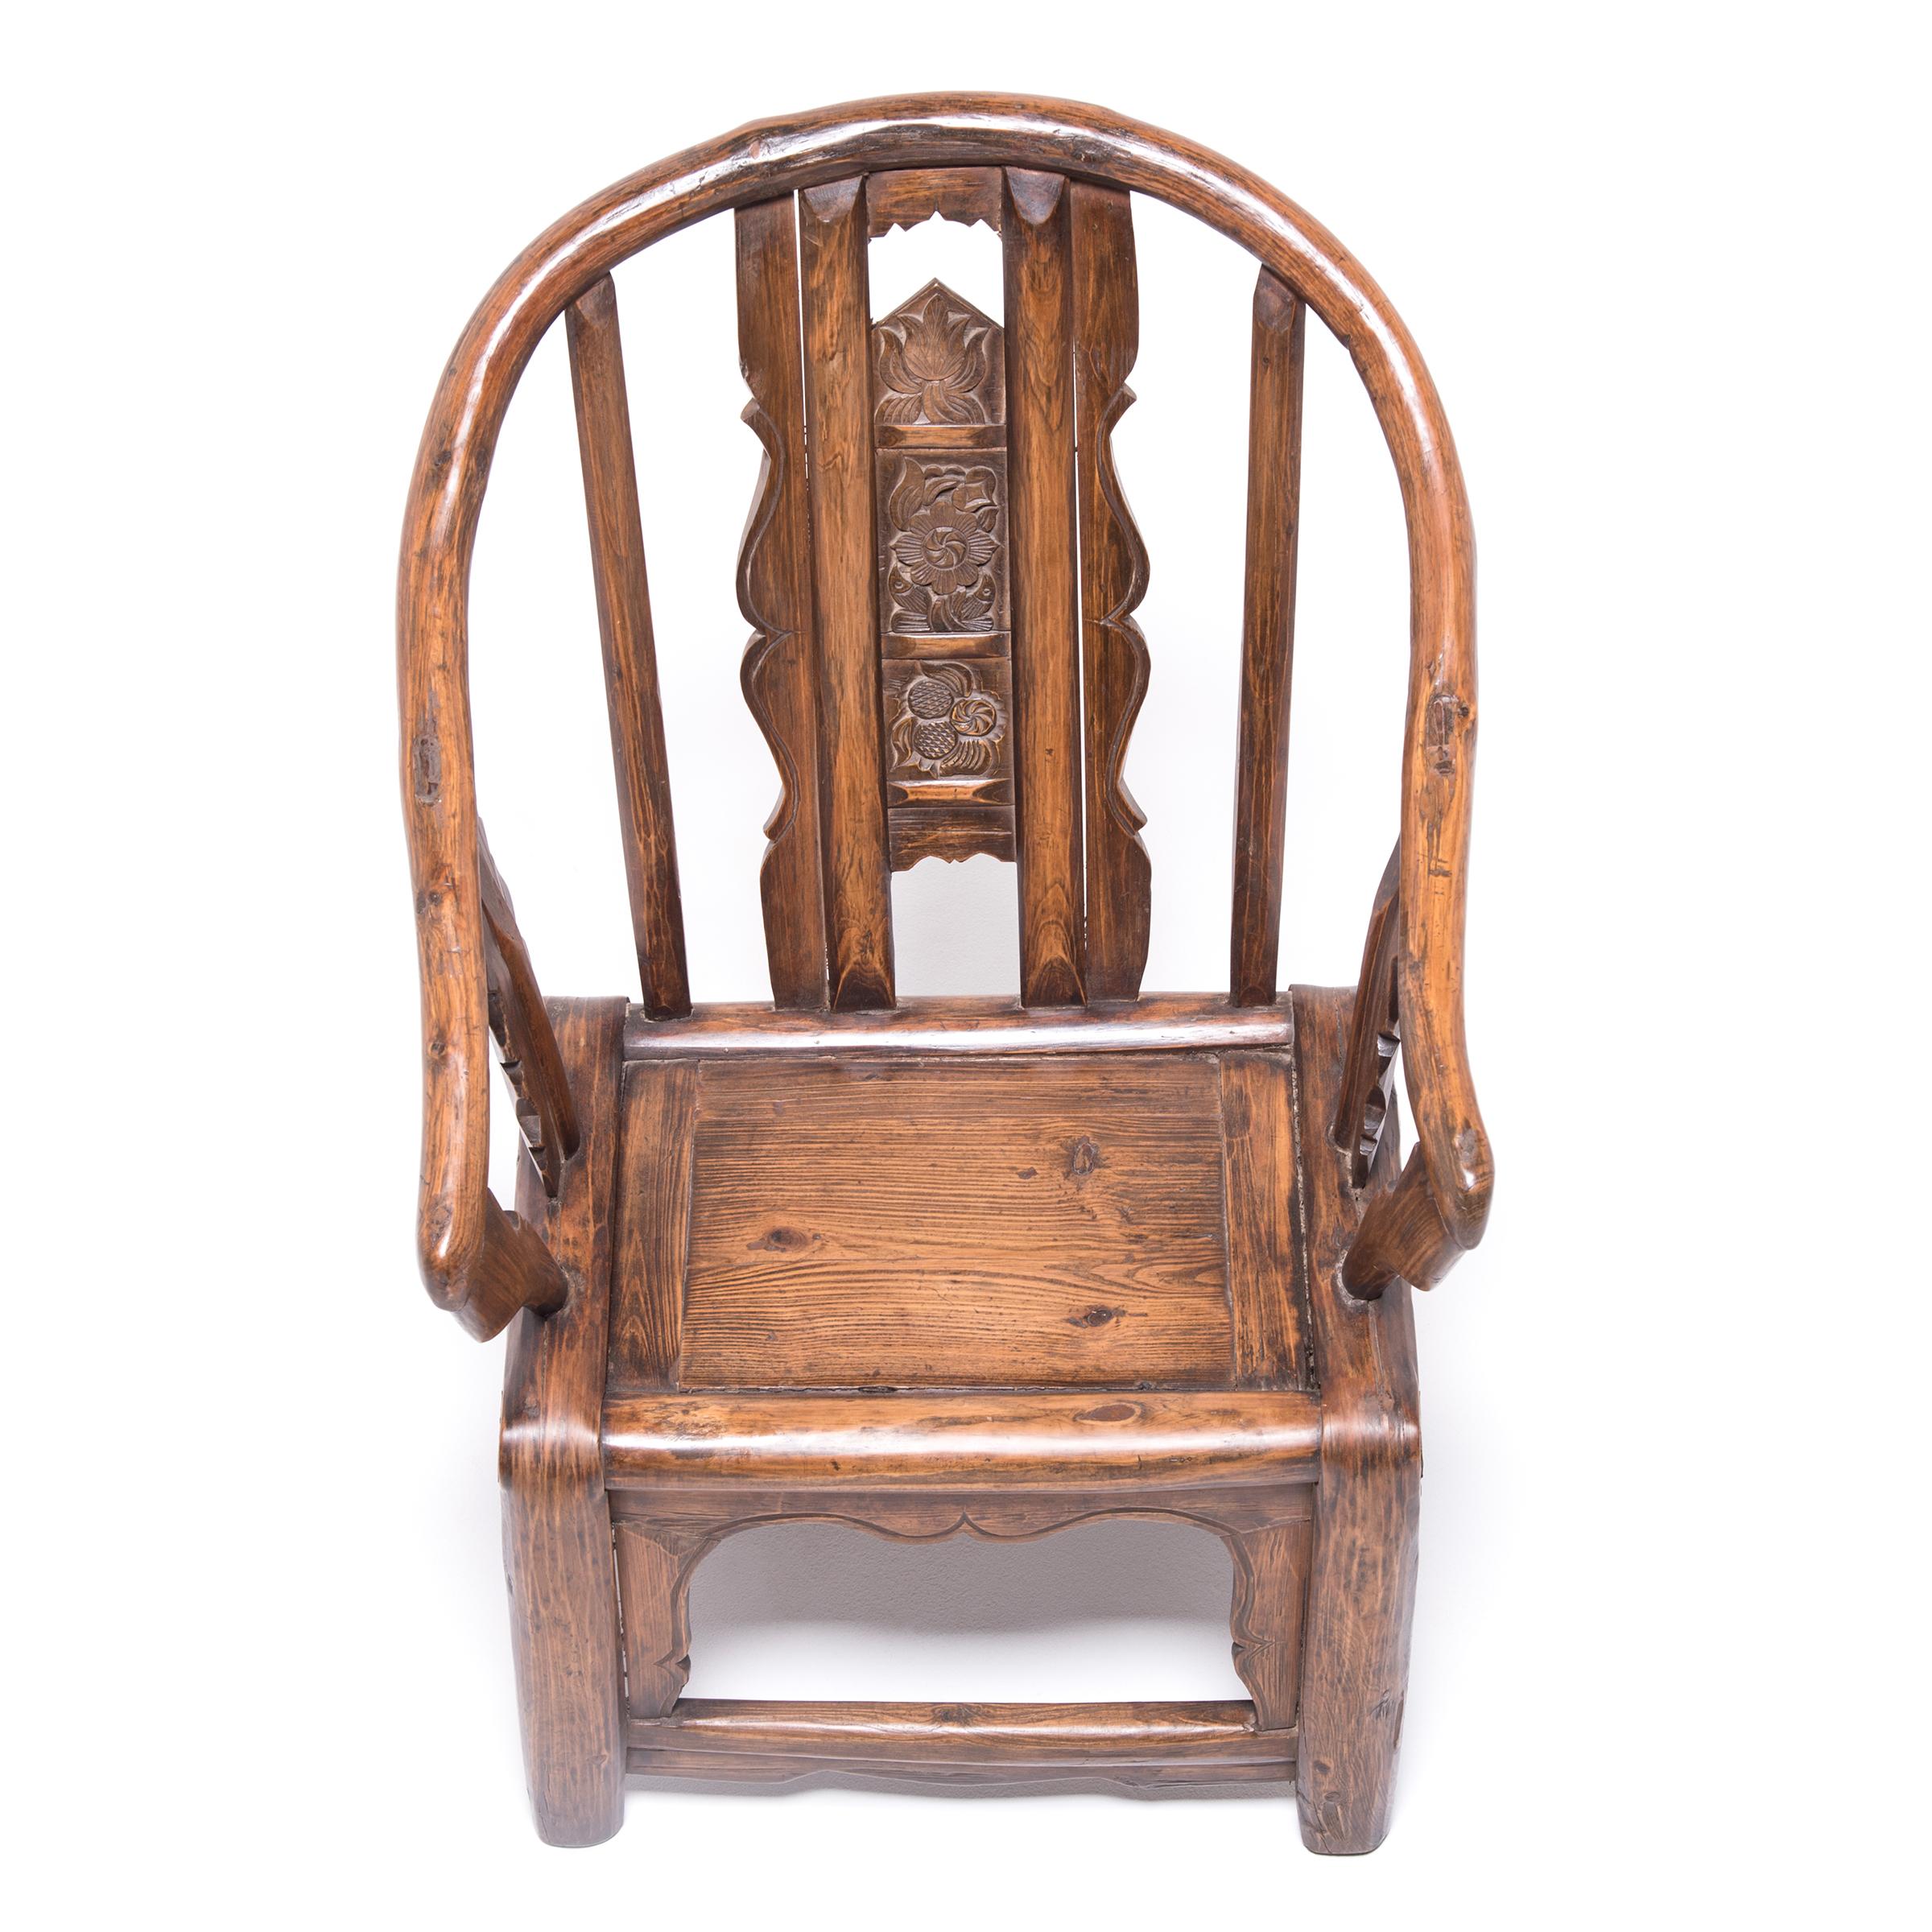 19th Century Low Chinese Bentwood Chair, c. 1850 For Sale